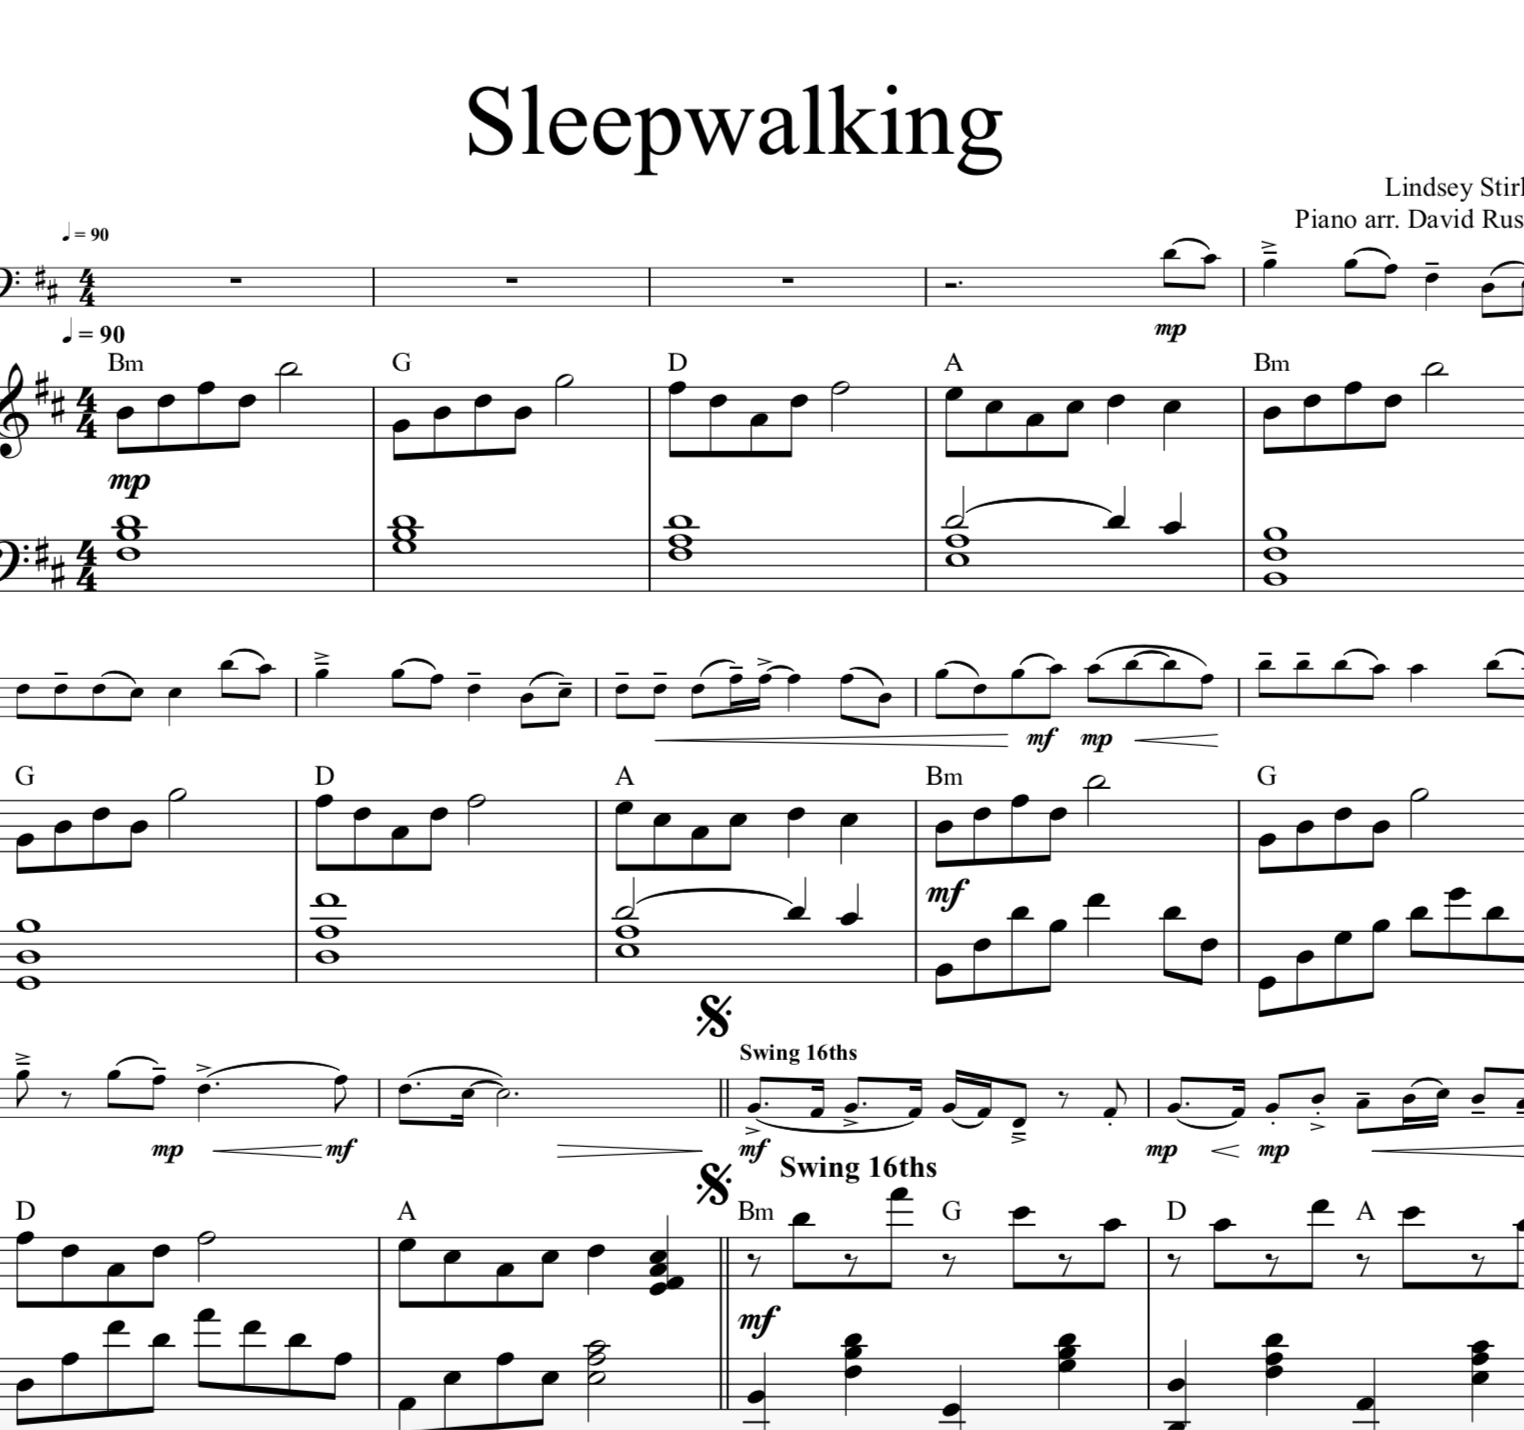 Twitter 上的Lindsey Stirling："#Sleepwalking sheet music is alert and # violin #cello #viola #piano **Piano accompaniment, original solo, and simplified included https://t.co/fiZNTfggfh https://t.co/QfkA0In4aZ" / Twitter